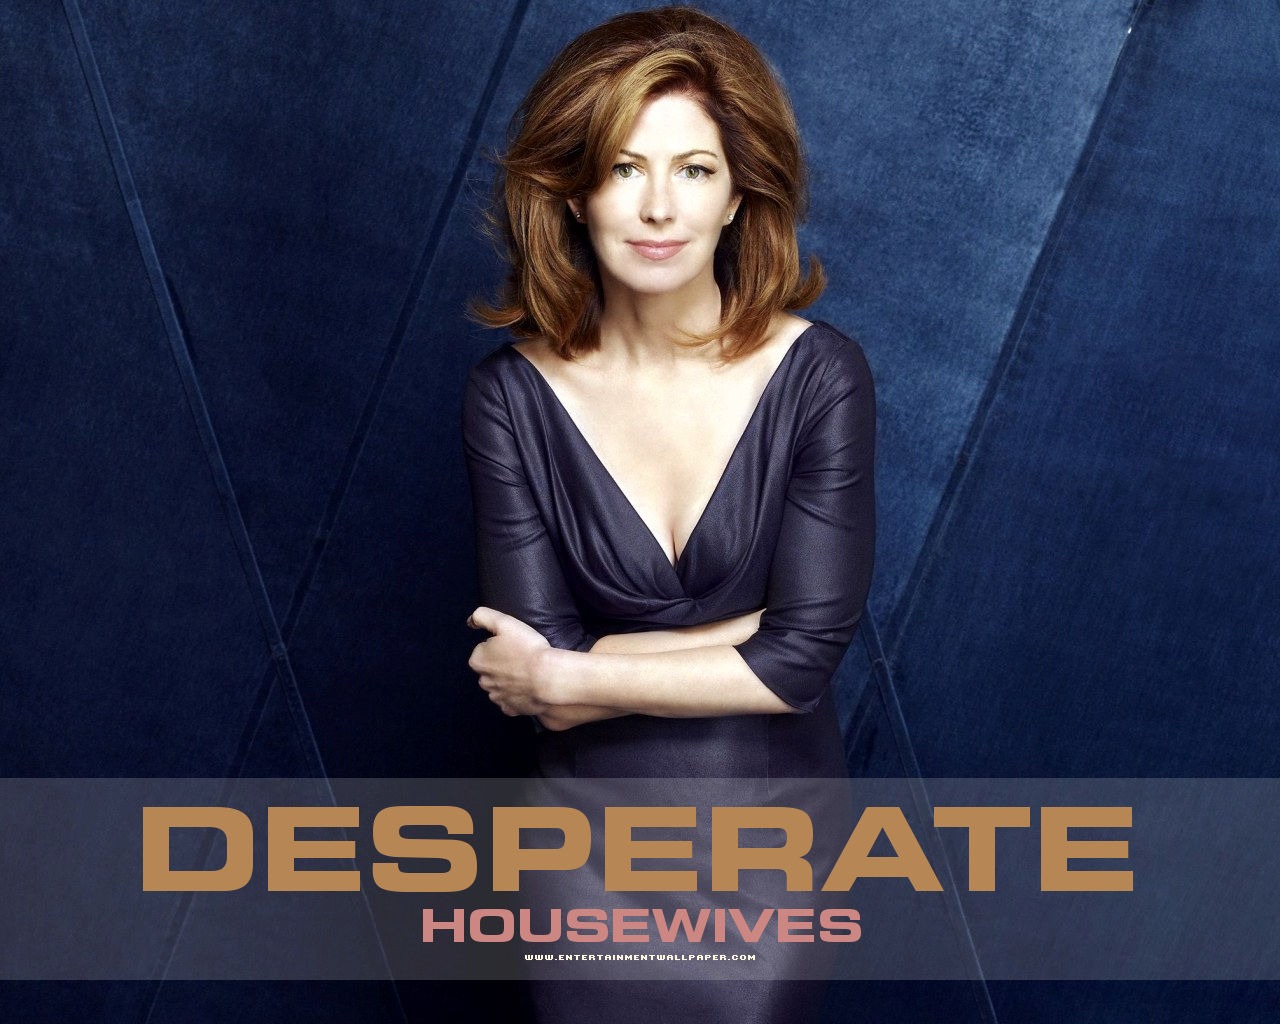 Desperate Housewives 絕望的主婦 #29 - 1280x1024